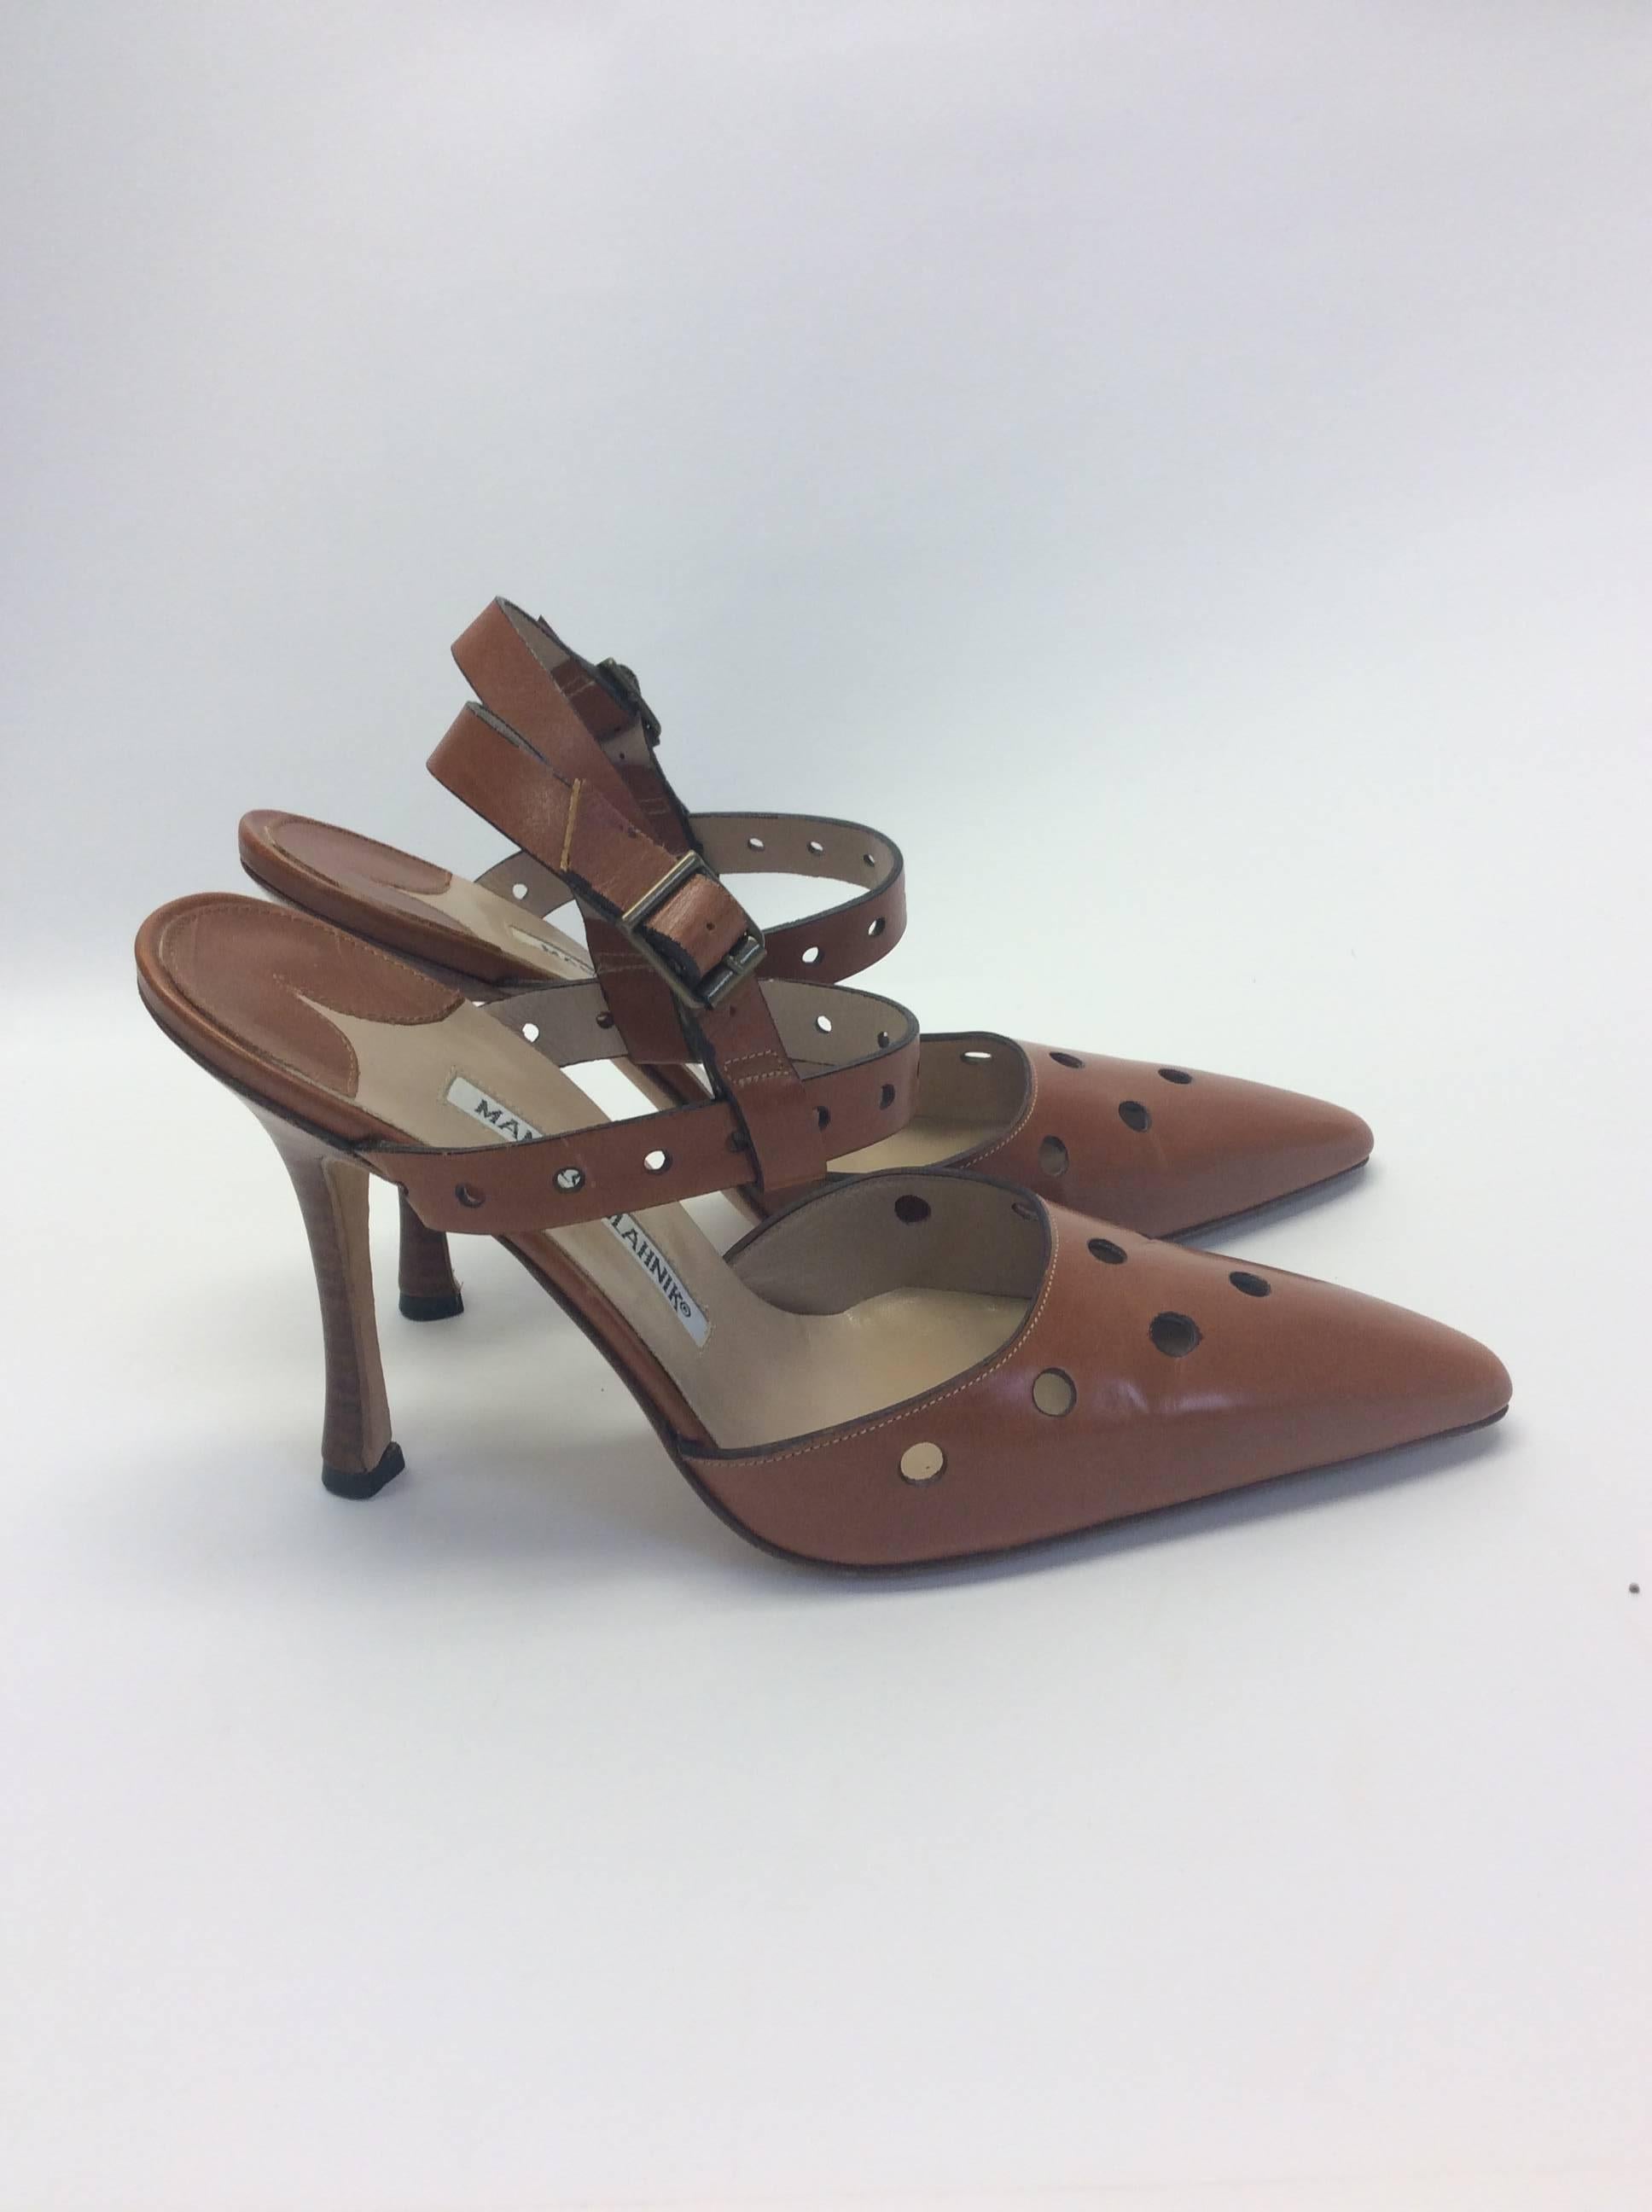 Manolo Blahnik Leather Heels With Cutouts In Excellent Condition For Sale In Narberth, PA